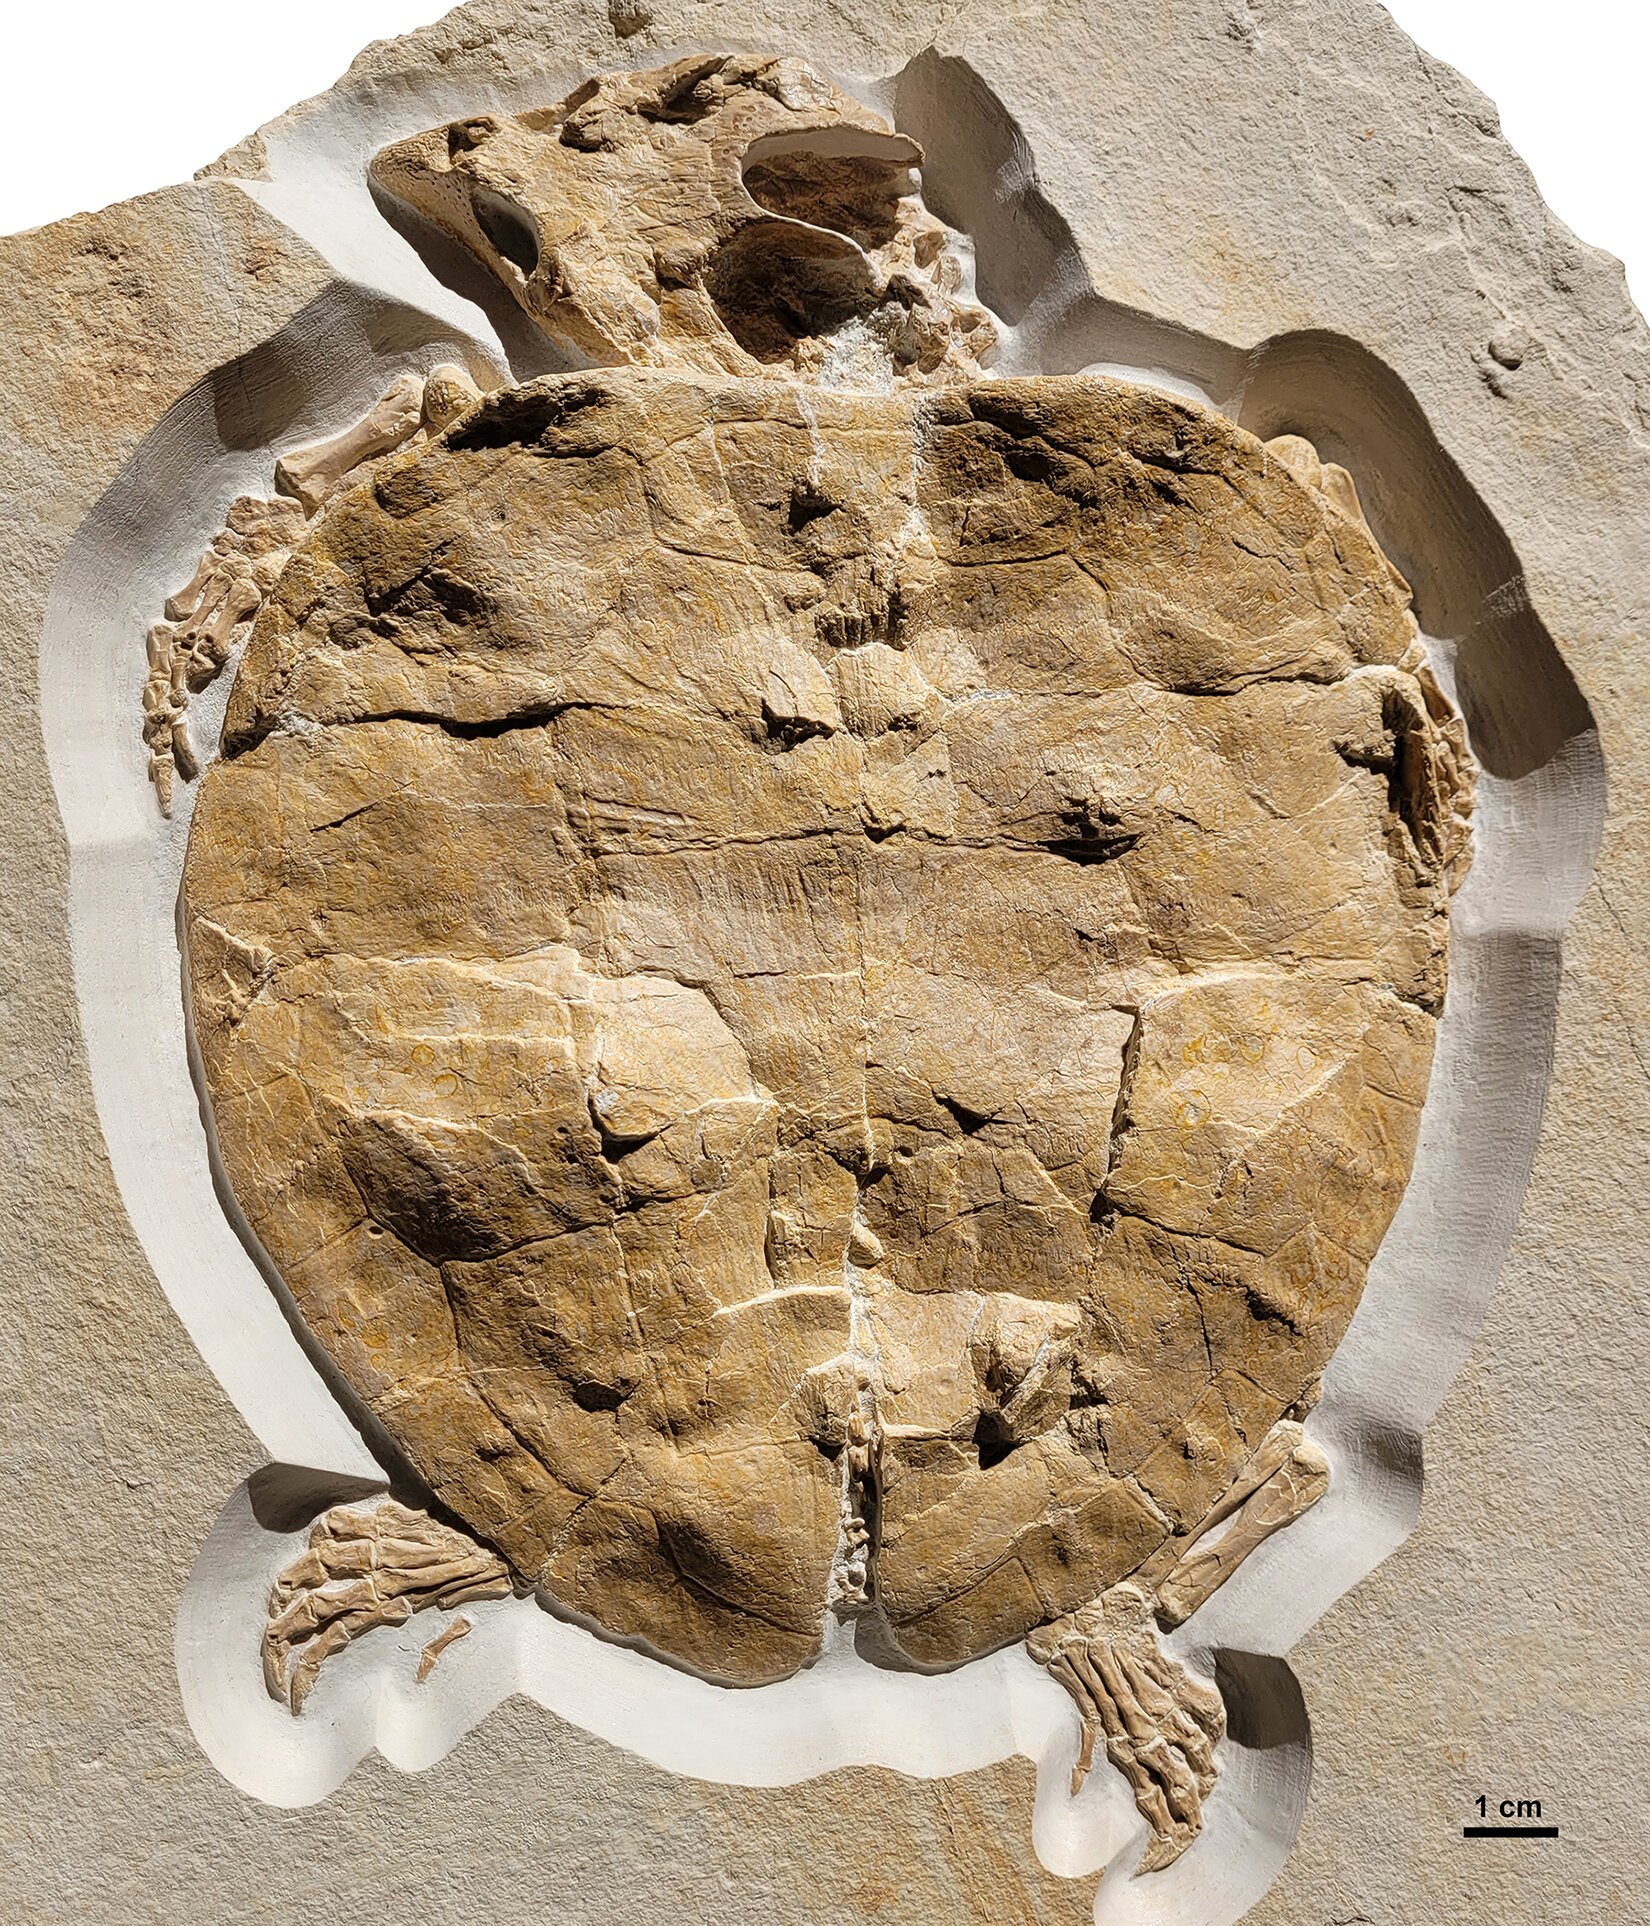 Perfectly preserved turtle fossil gives clues to habitat 150 million years  ago